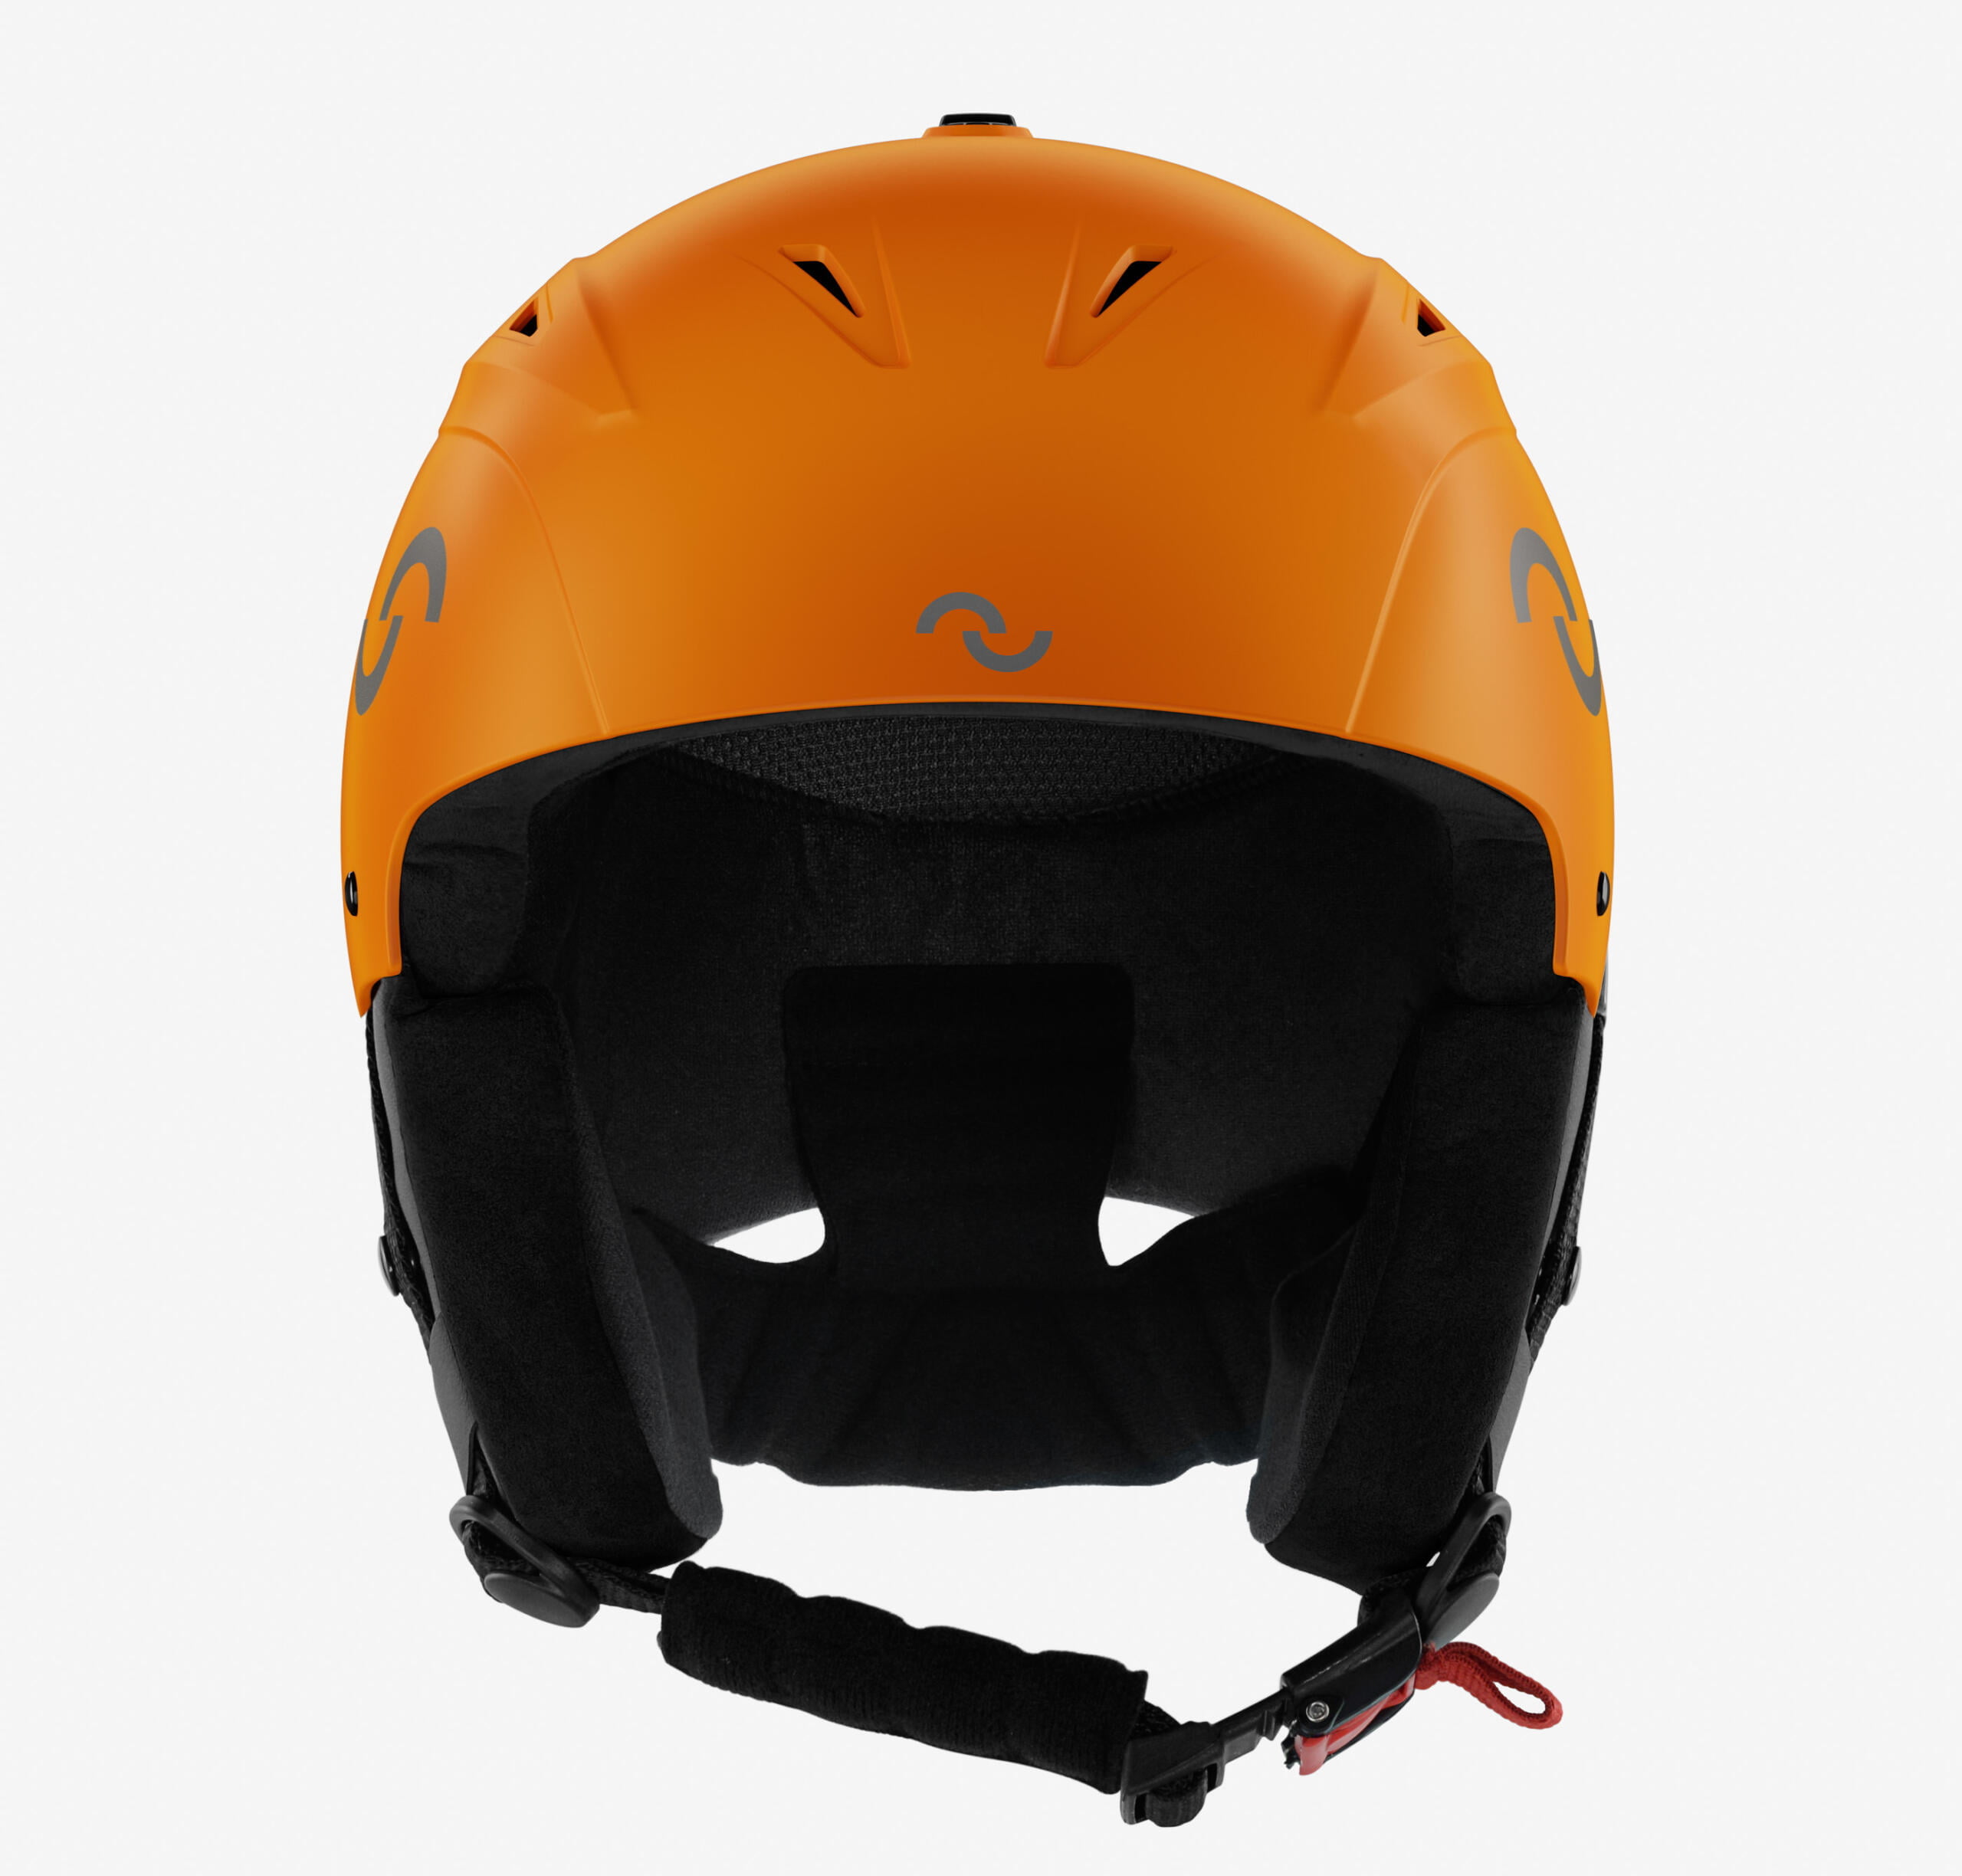 Legend TechMatt ski helmet in Princeton Orange with a matte finish, adaptive foam, and adjustable fit, offering a perfect fusion of style and functionality.